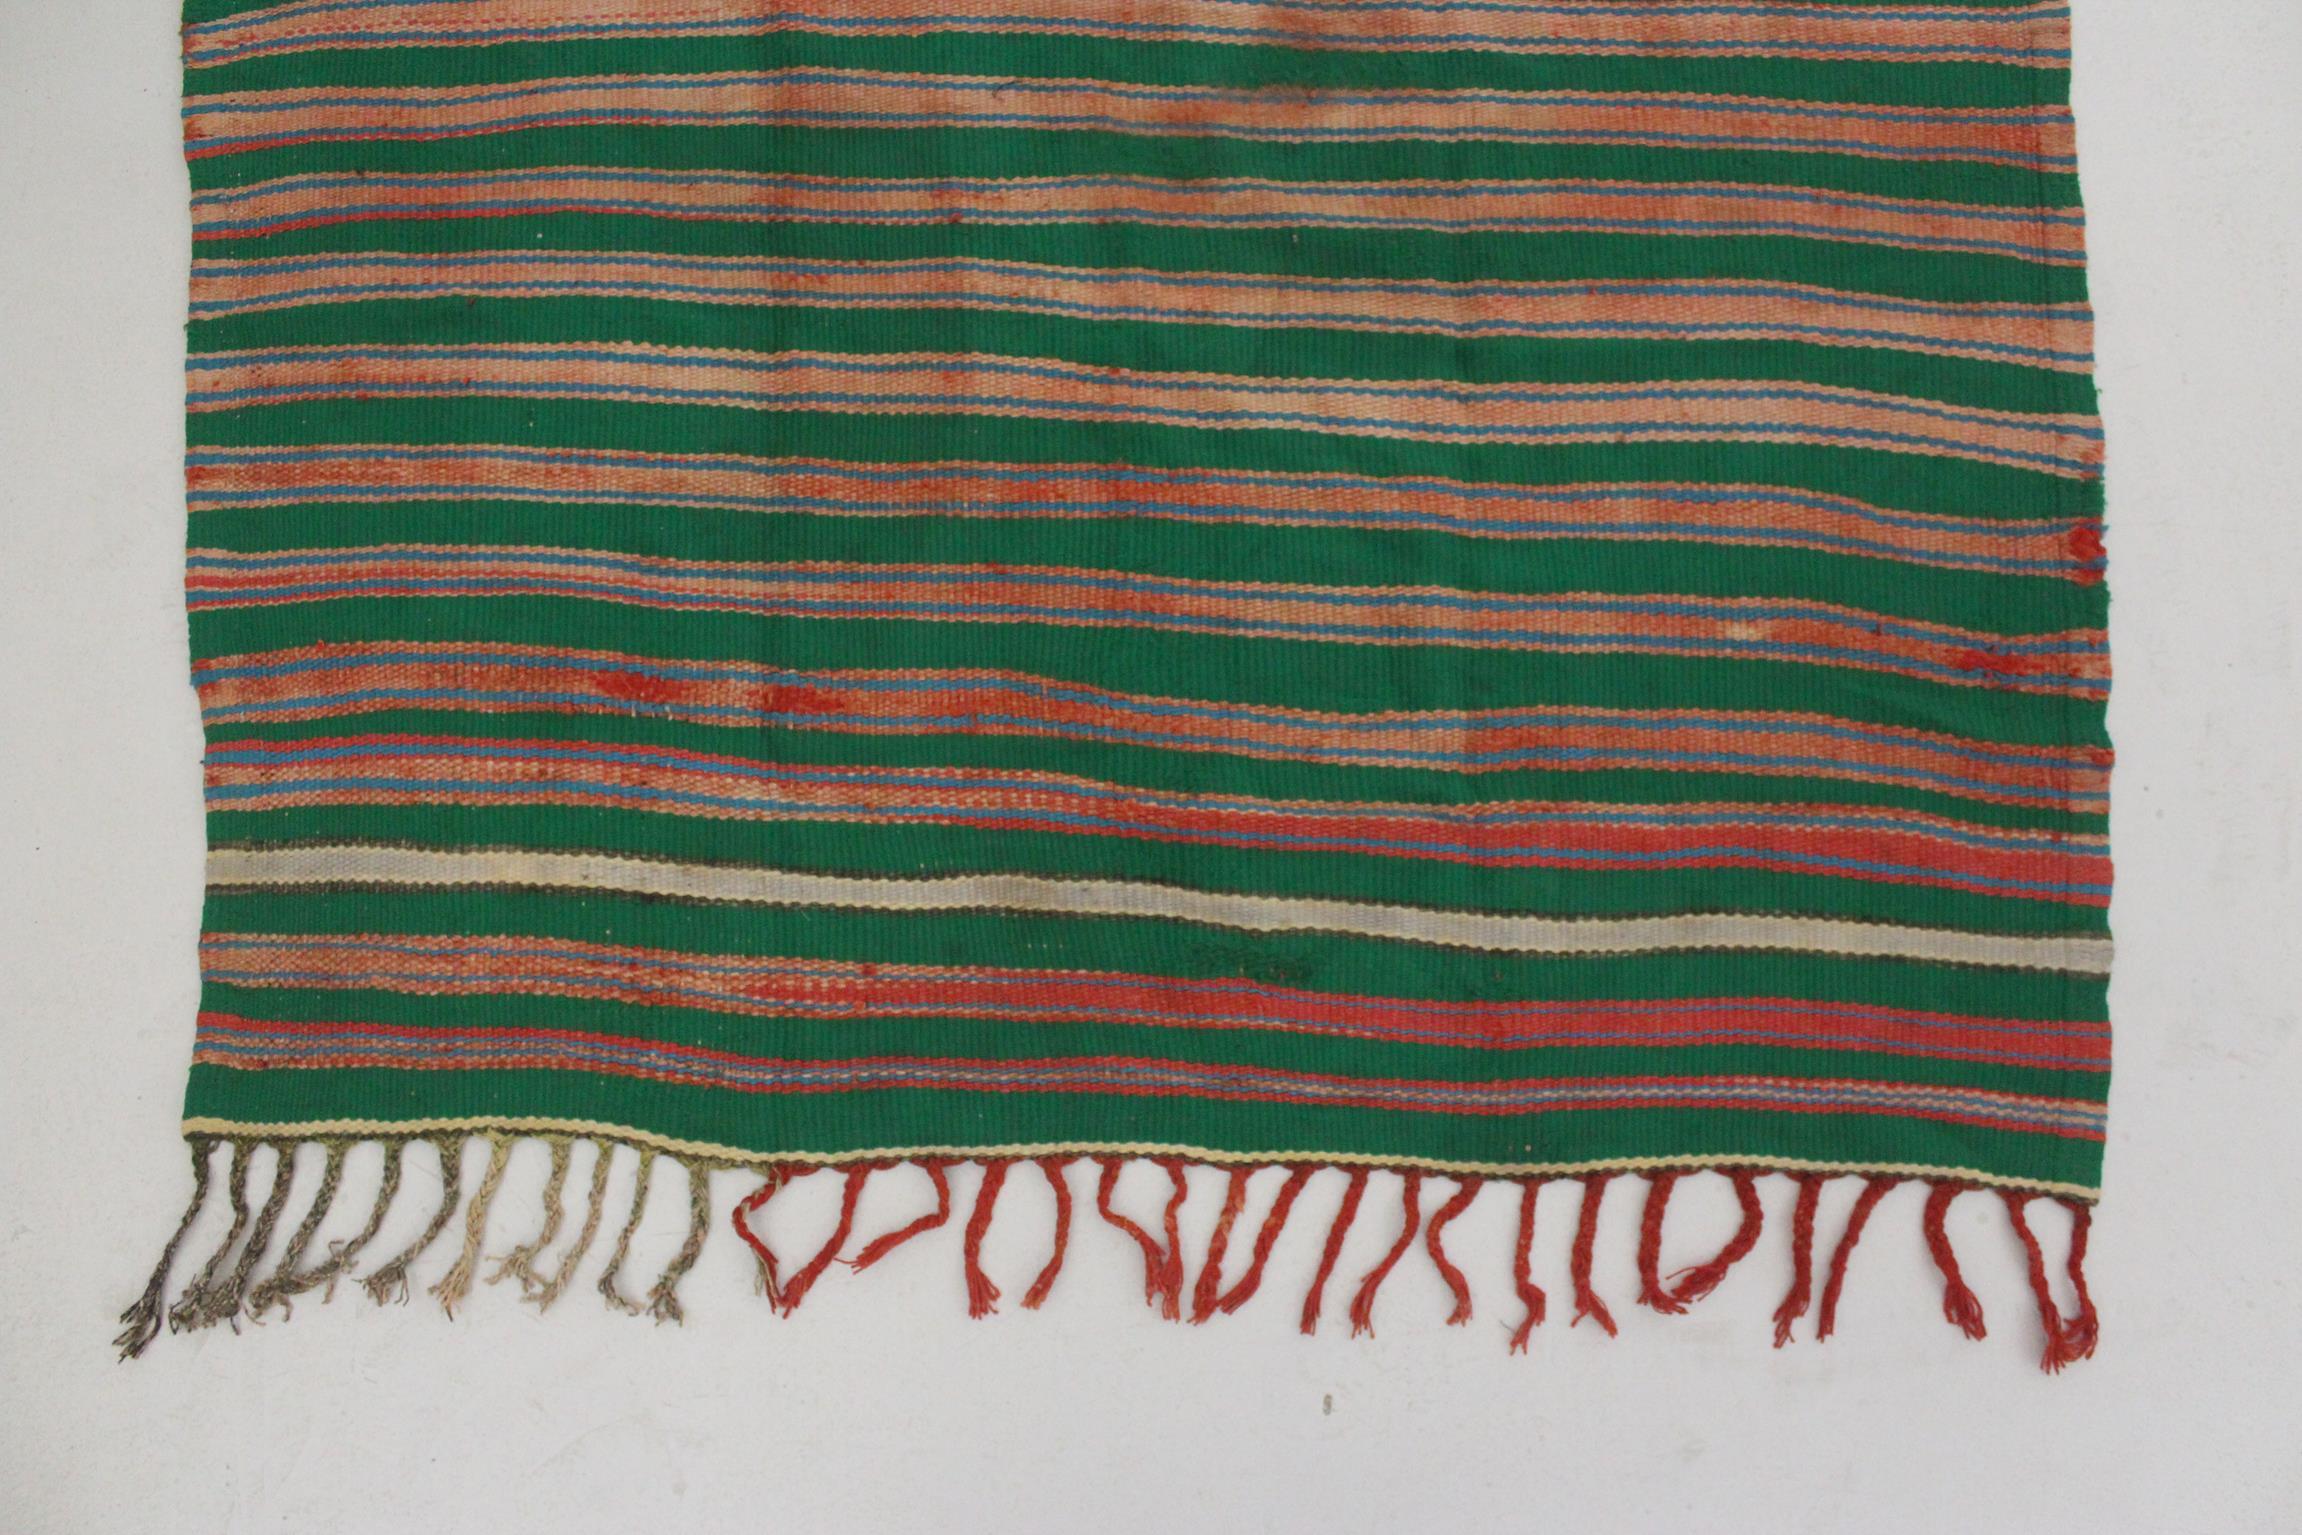 20th Century Vintage Moroccan striped kilim rug - Green/pink/red - 5.1x10.2feet / 157x312cm For Sale